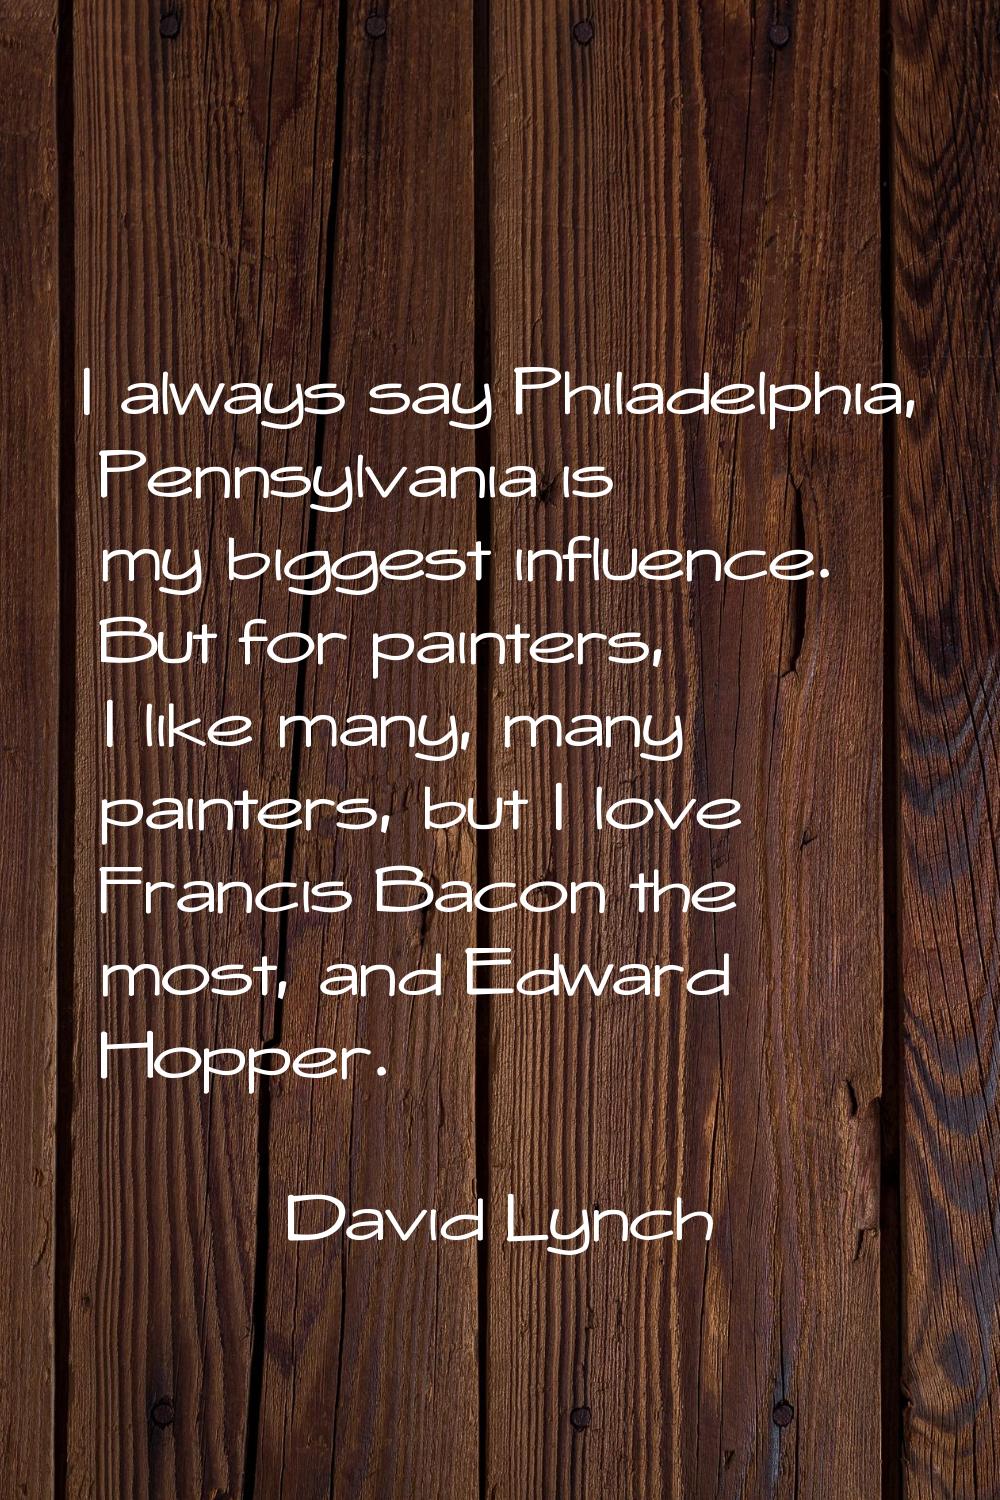 I always say Philadelphia, Pennsylvania is my biggest influence. But for painters, I like many, man